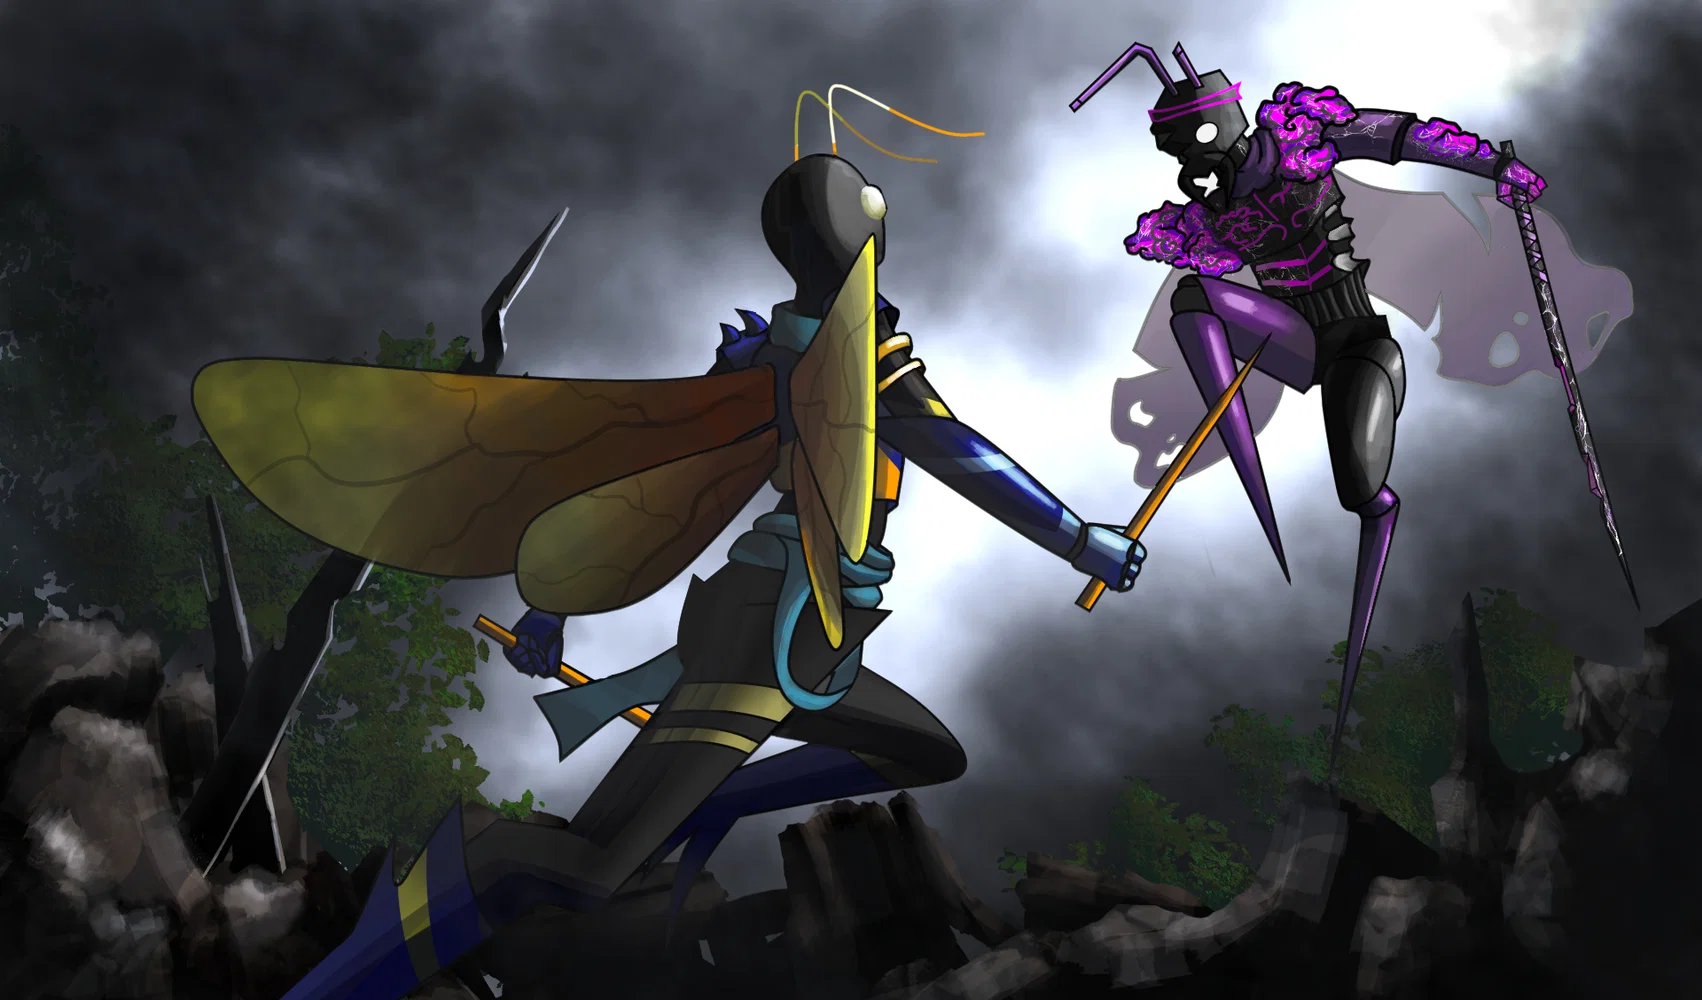 Keyframe of the hero (left) and the villian (right) in a battle